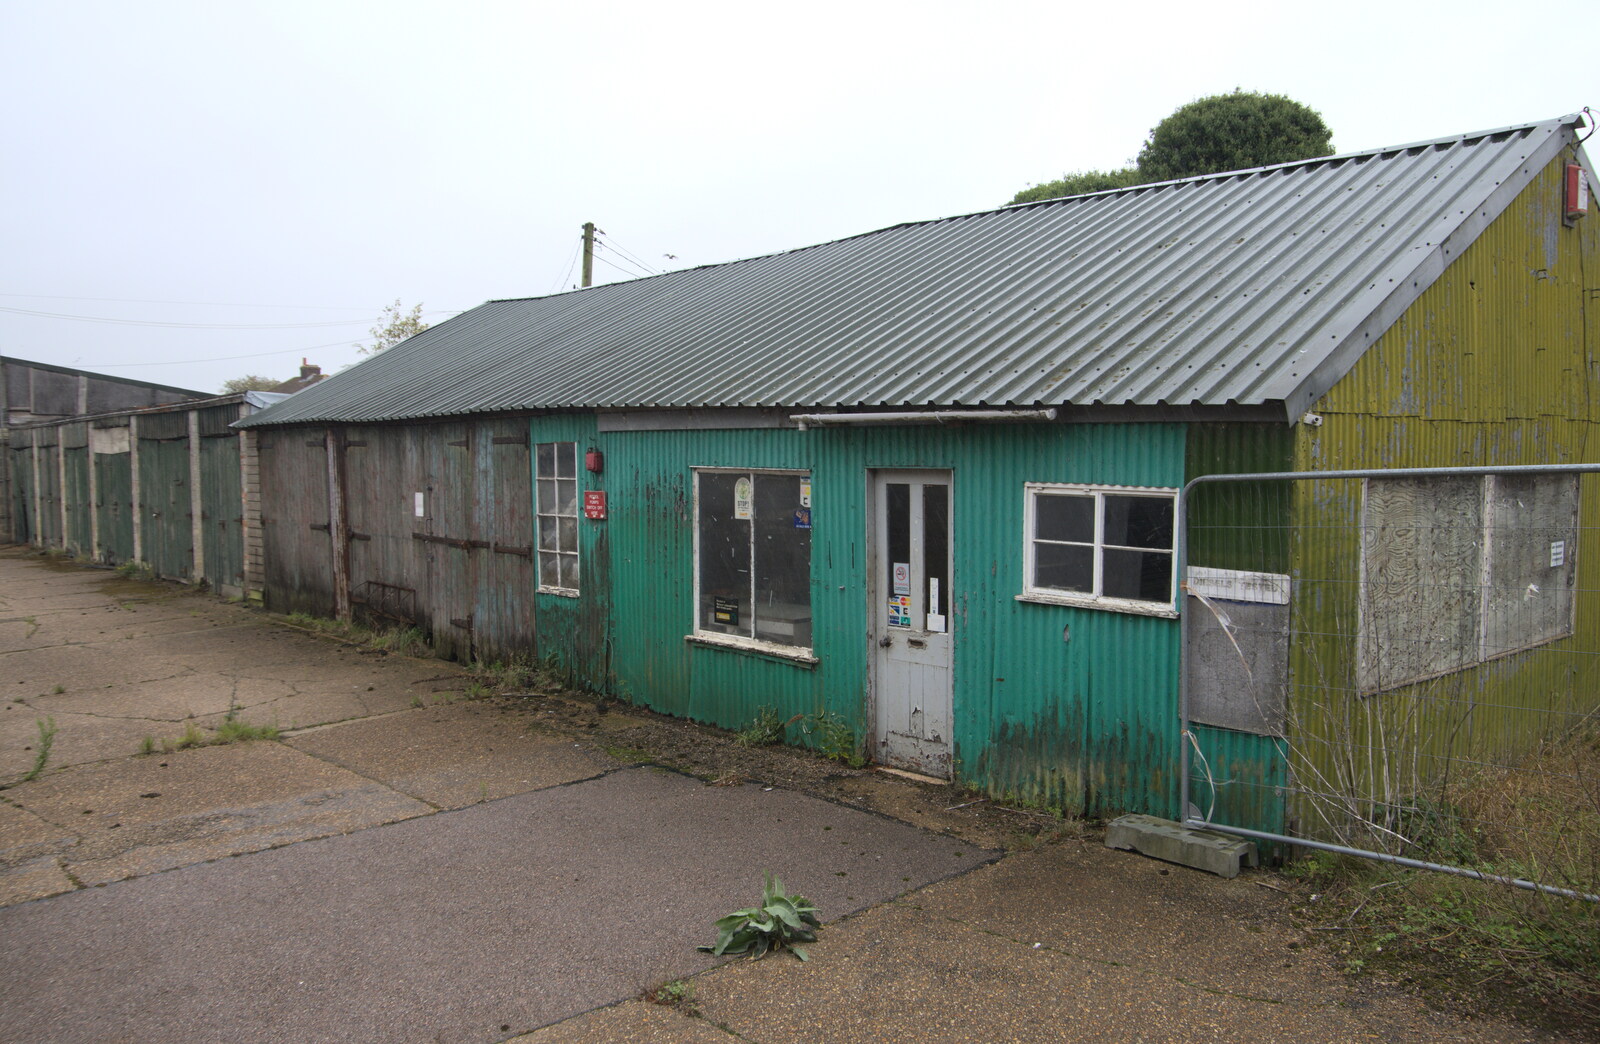 Old garage sheds from A Trip to Orford, Suffolk - 29th August 2020